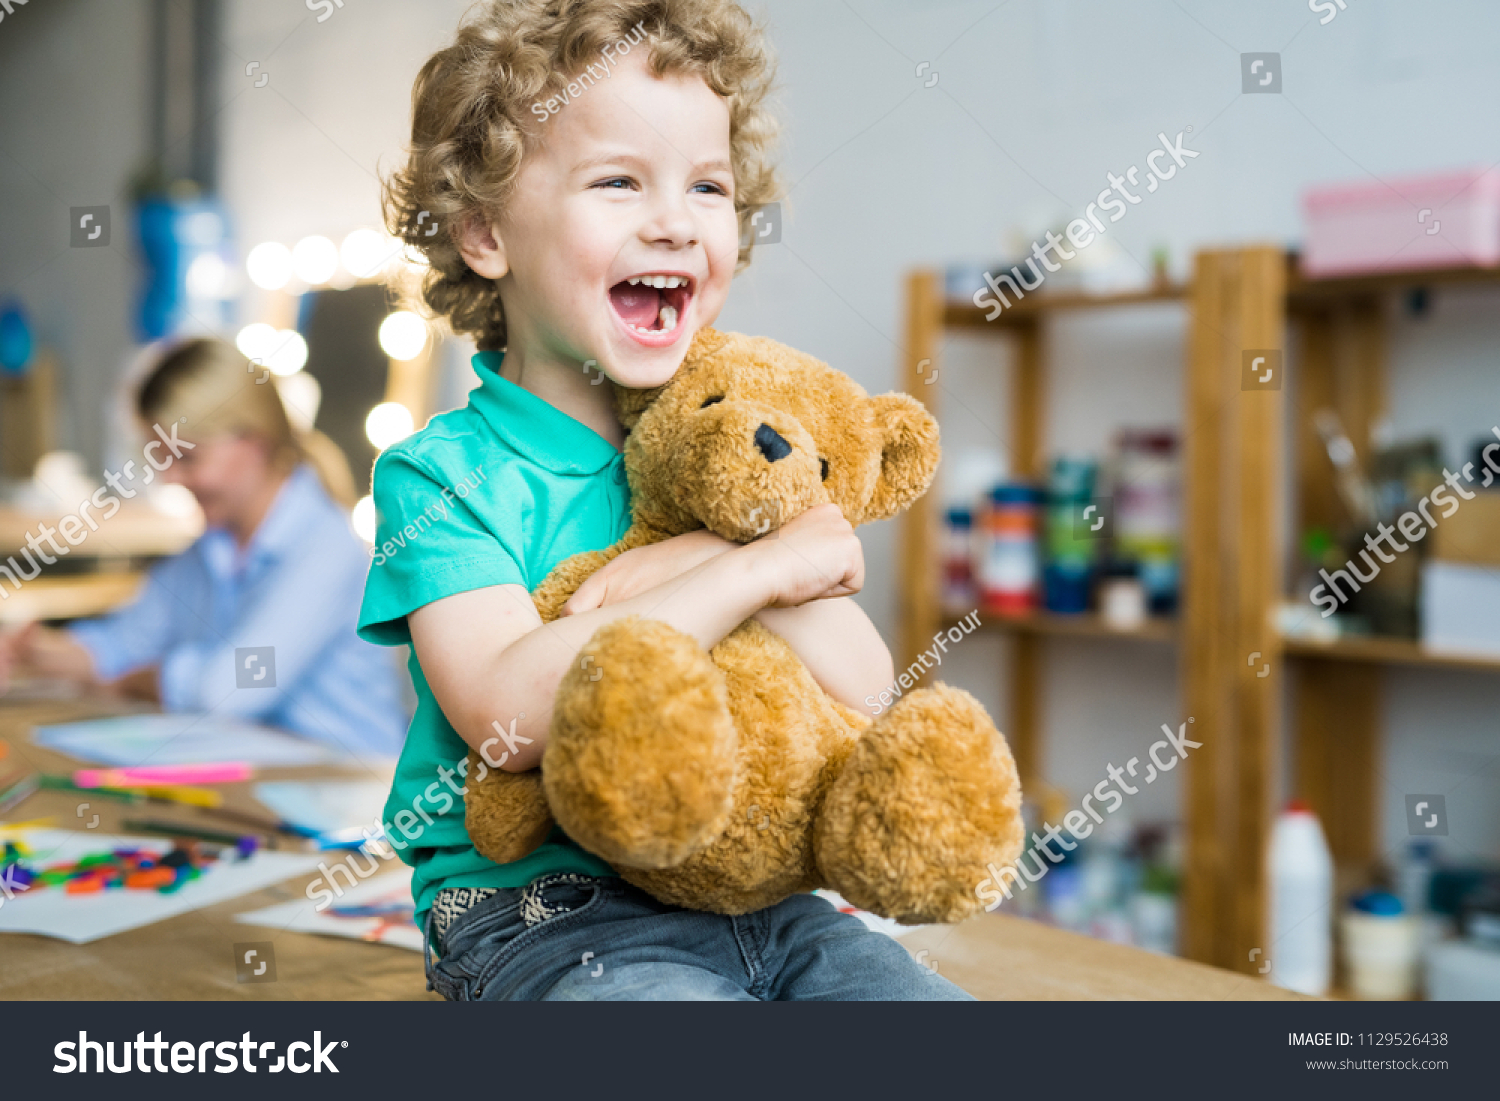 Warm toned portrait of happy curly haired kid laughing cheerfully and hugging teddy bear toy, copy space #1129526438